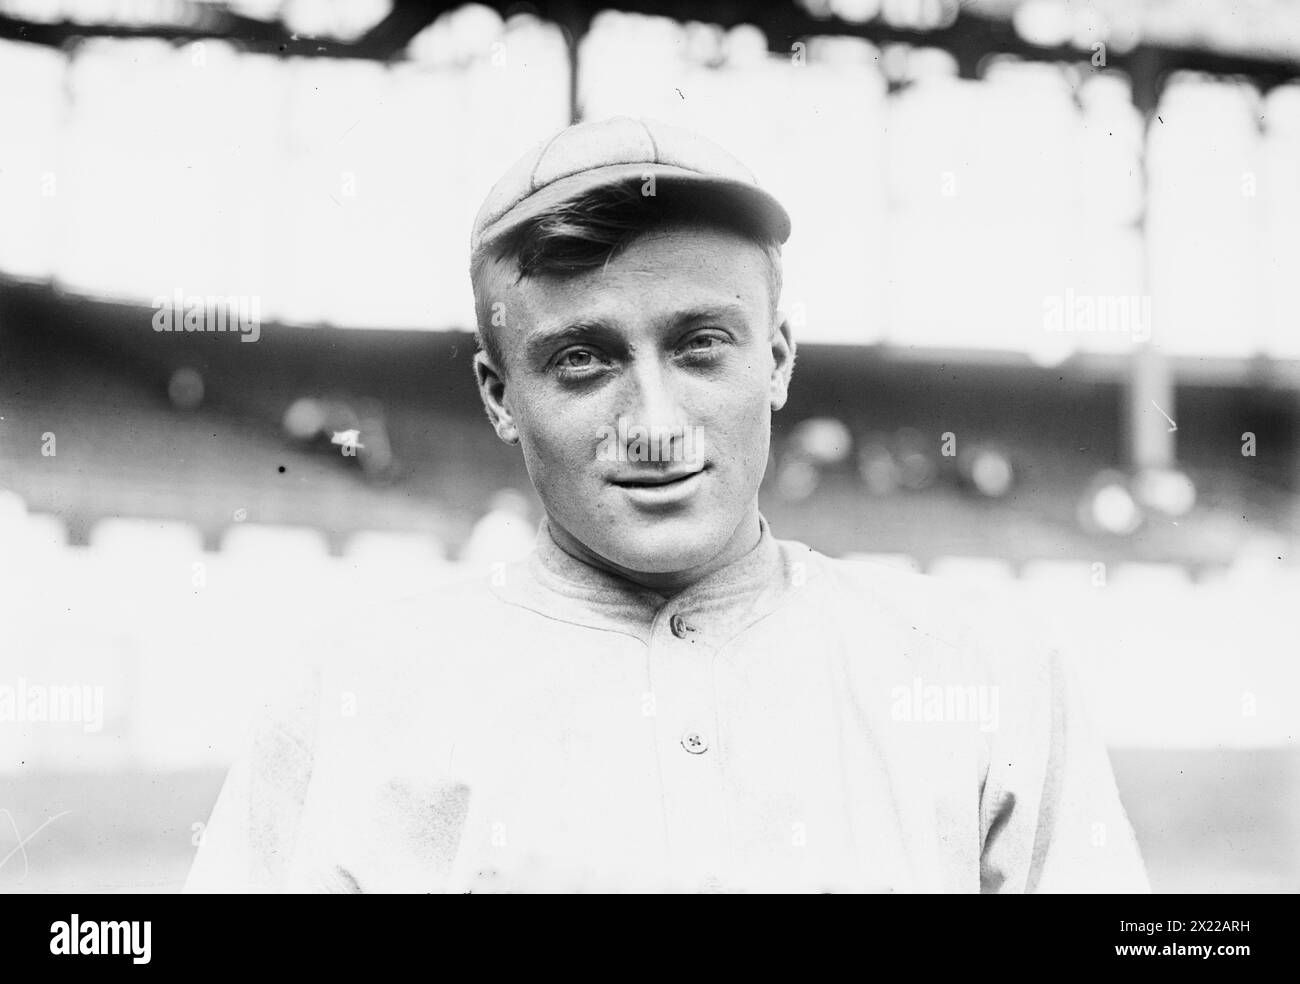 Lee Magee, St Louis NL, 1913. Foto Stock